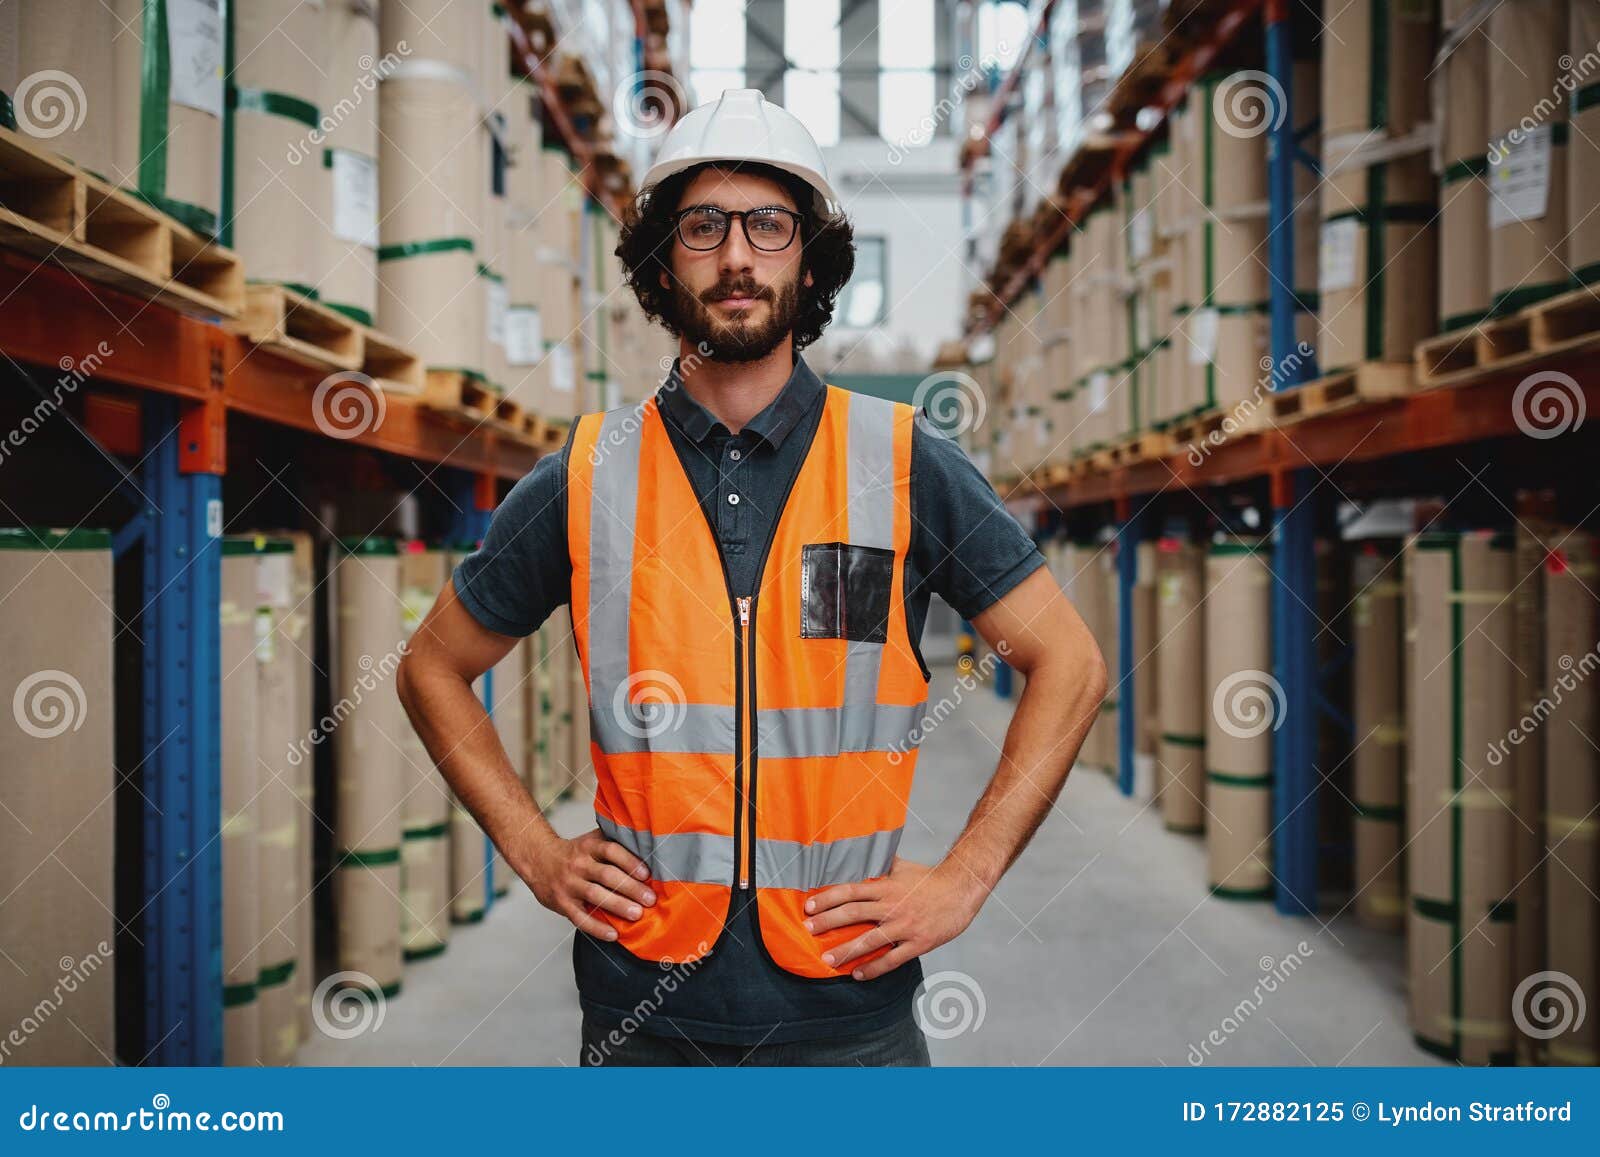 Confident Warehouse Manager Standing in between Shelf with Hands on